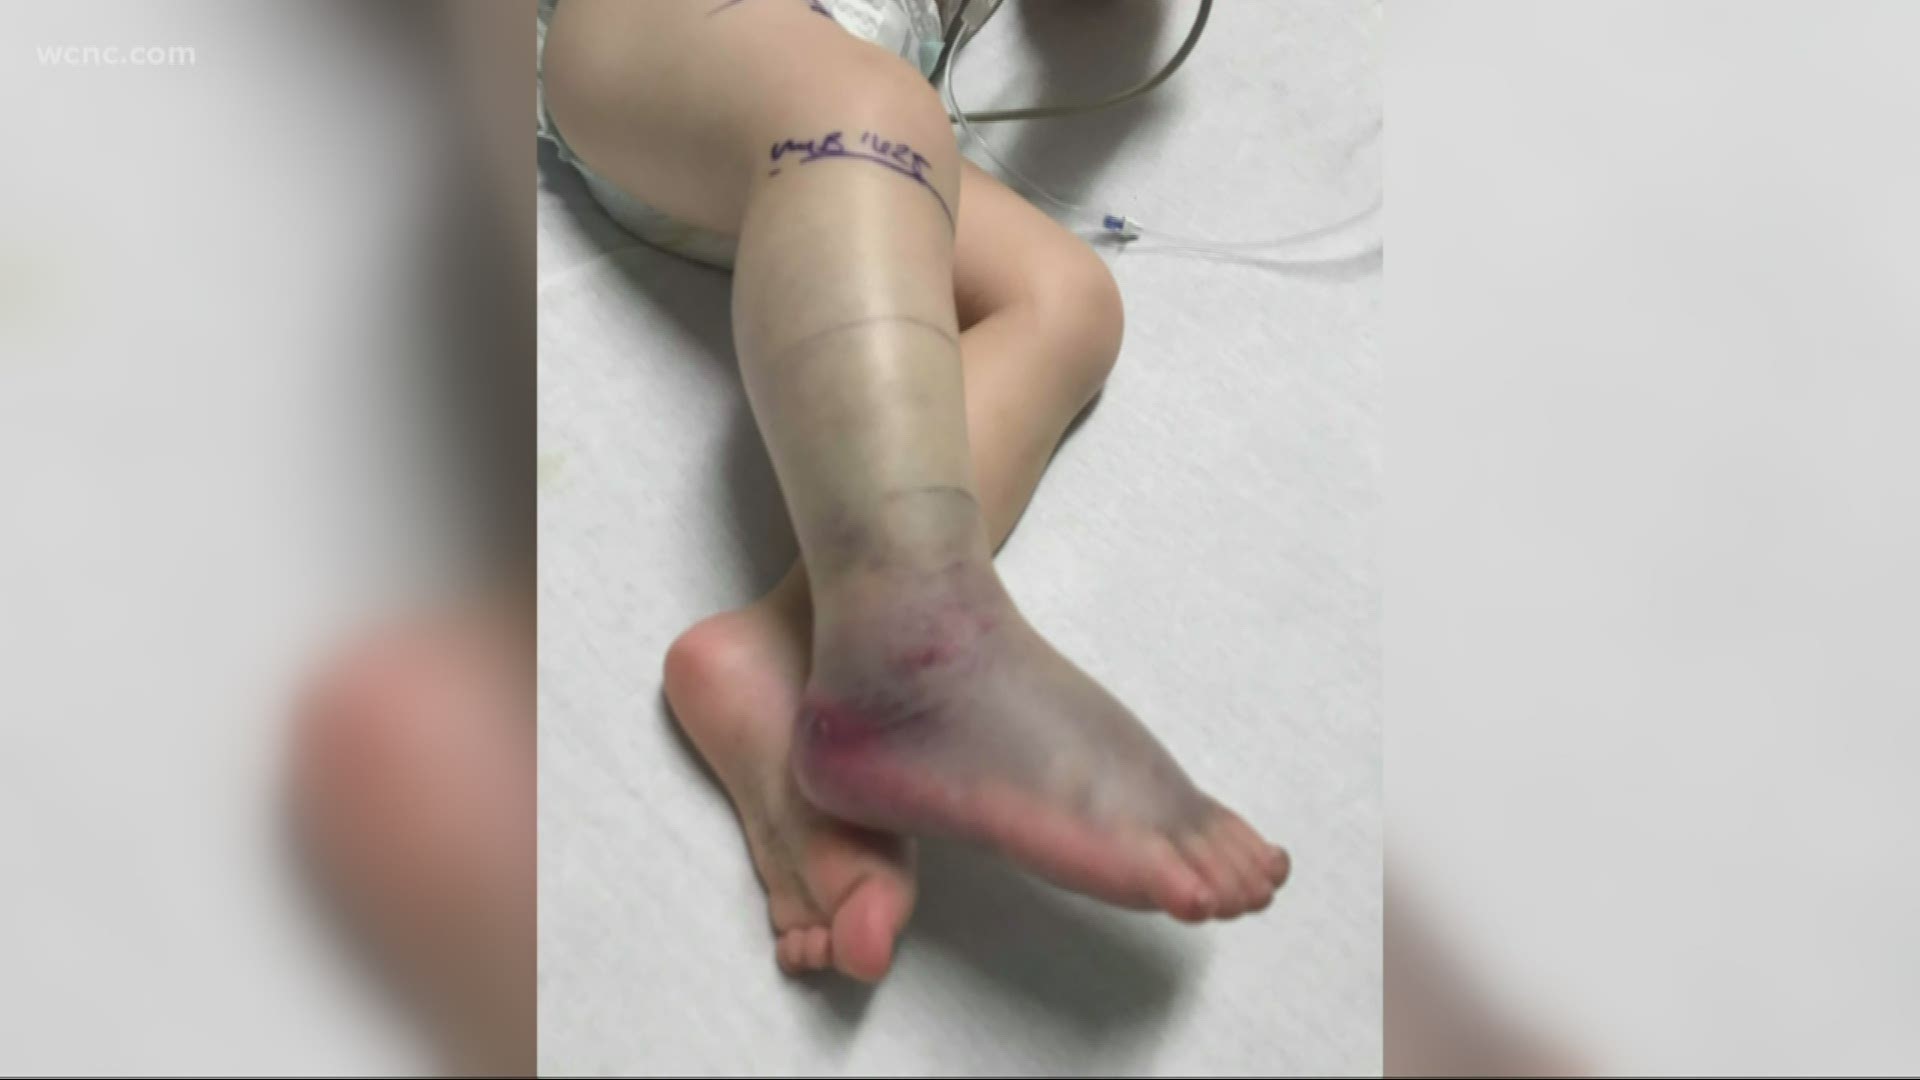 A young boy in the Charleston area was rushed to the hospital after he was bitten while playing in the yard of his home. He was given anti-venom.